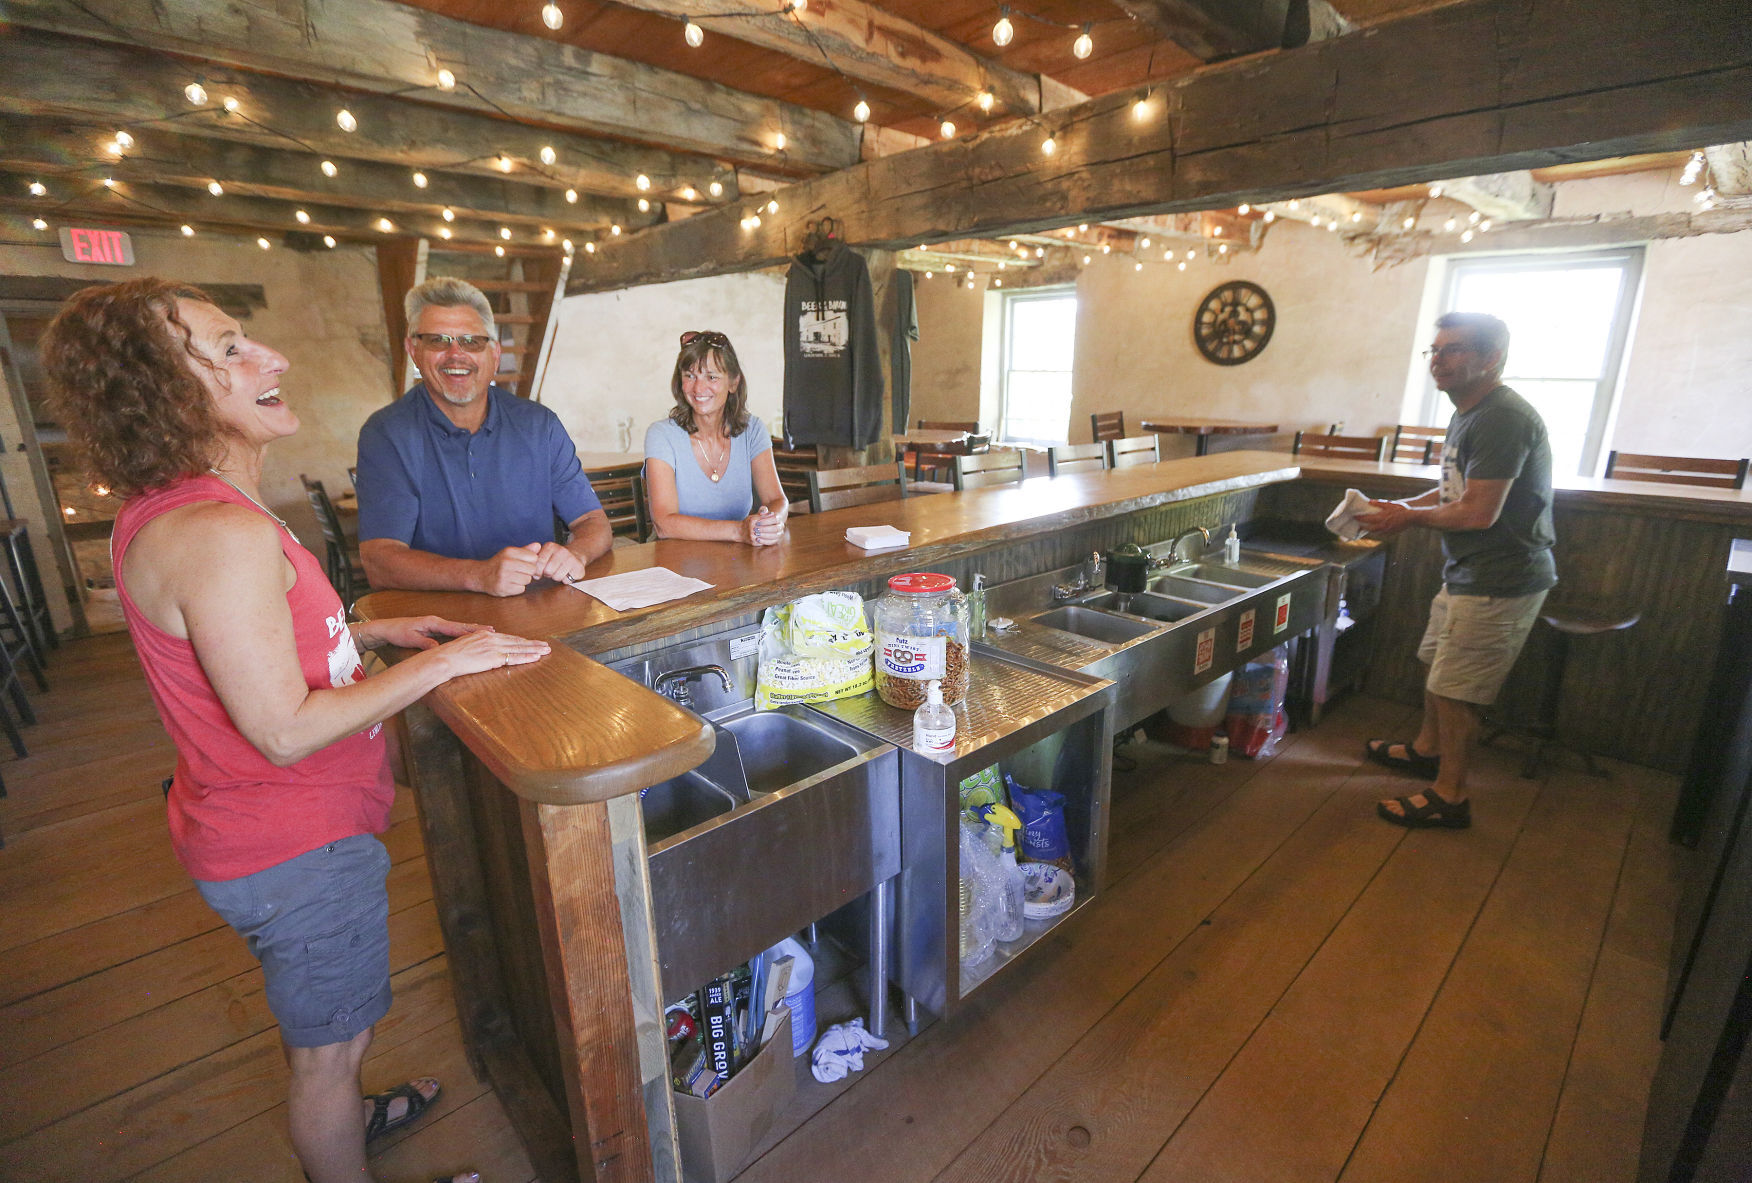 The owners of Gehlen House Inn and Barn, Kari Vize (left) and her husband, Don (far right), chat Sunday with customers Rhett and Keller Coatney, of Sabula, Iowa. The historic establishment recently reopened after some renovations. PHOTO CREDIT: Dave Kettering